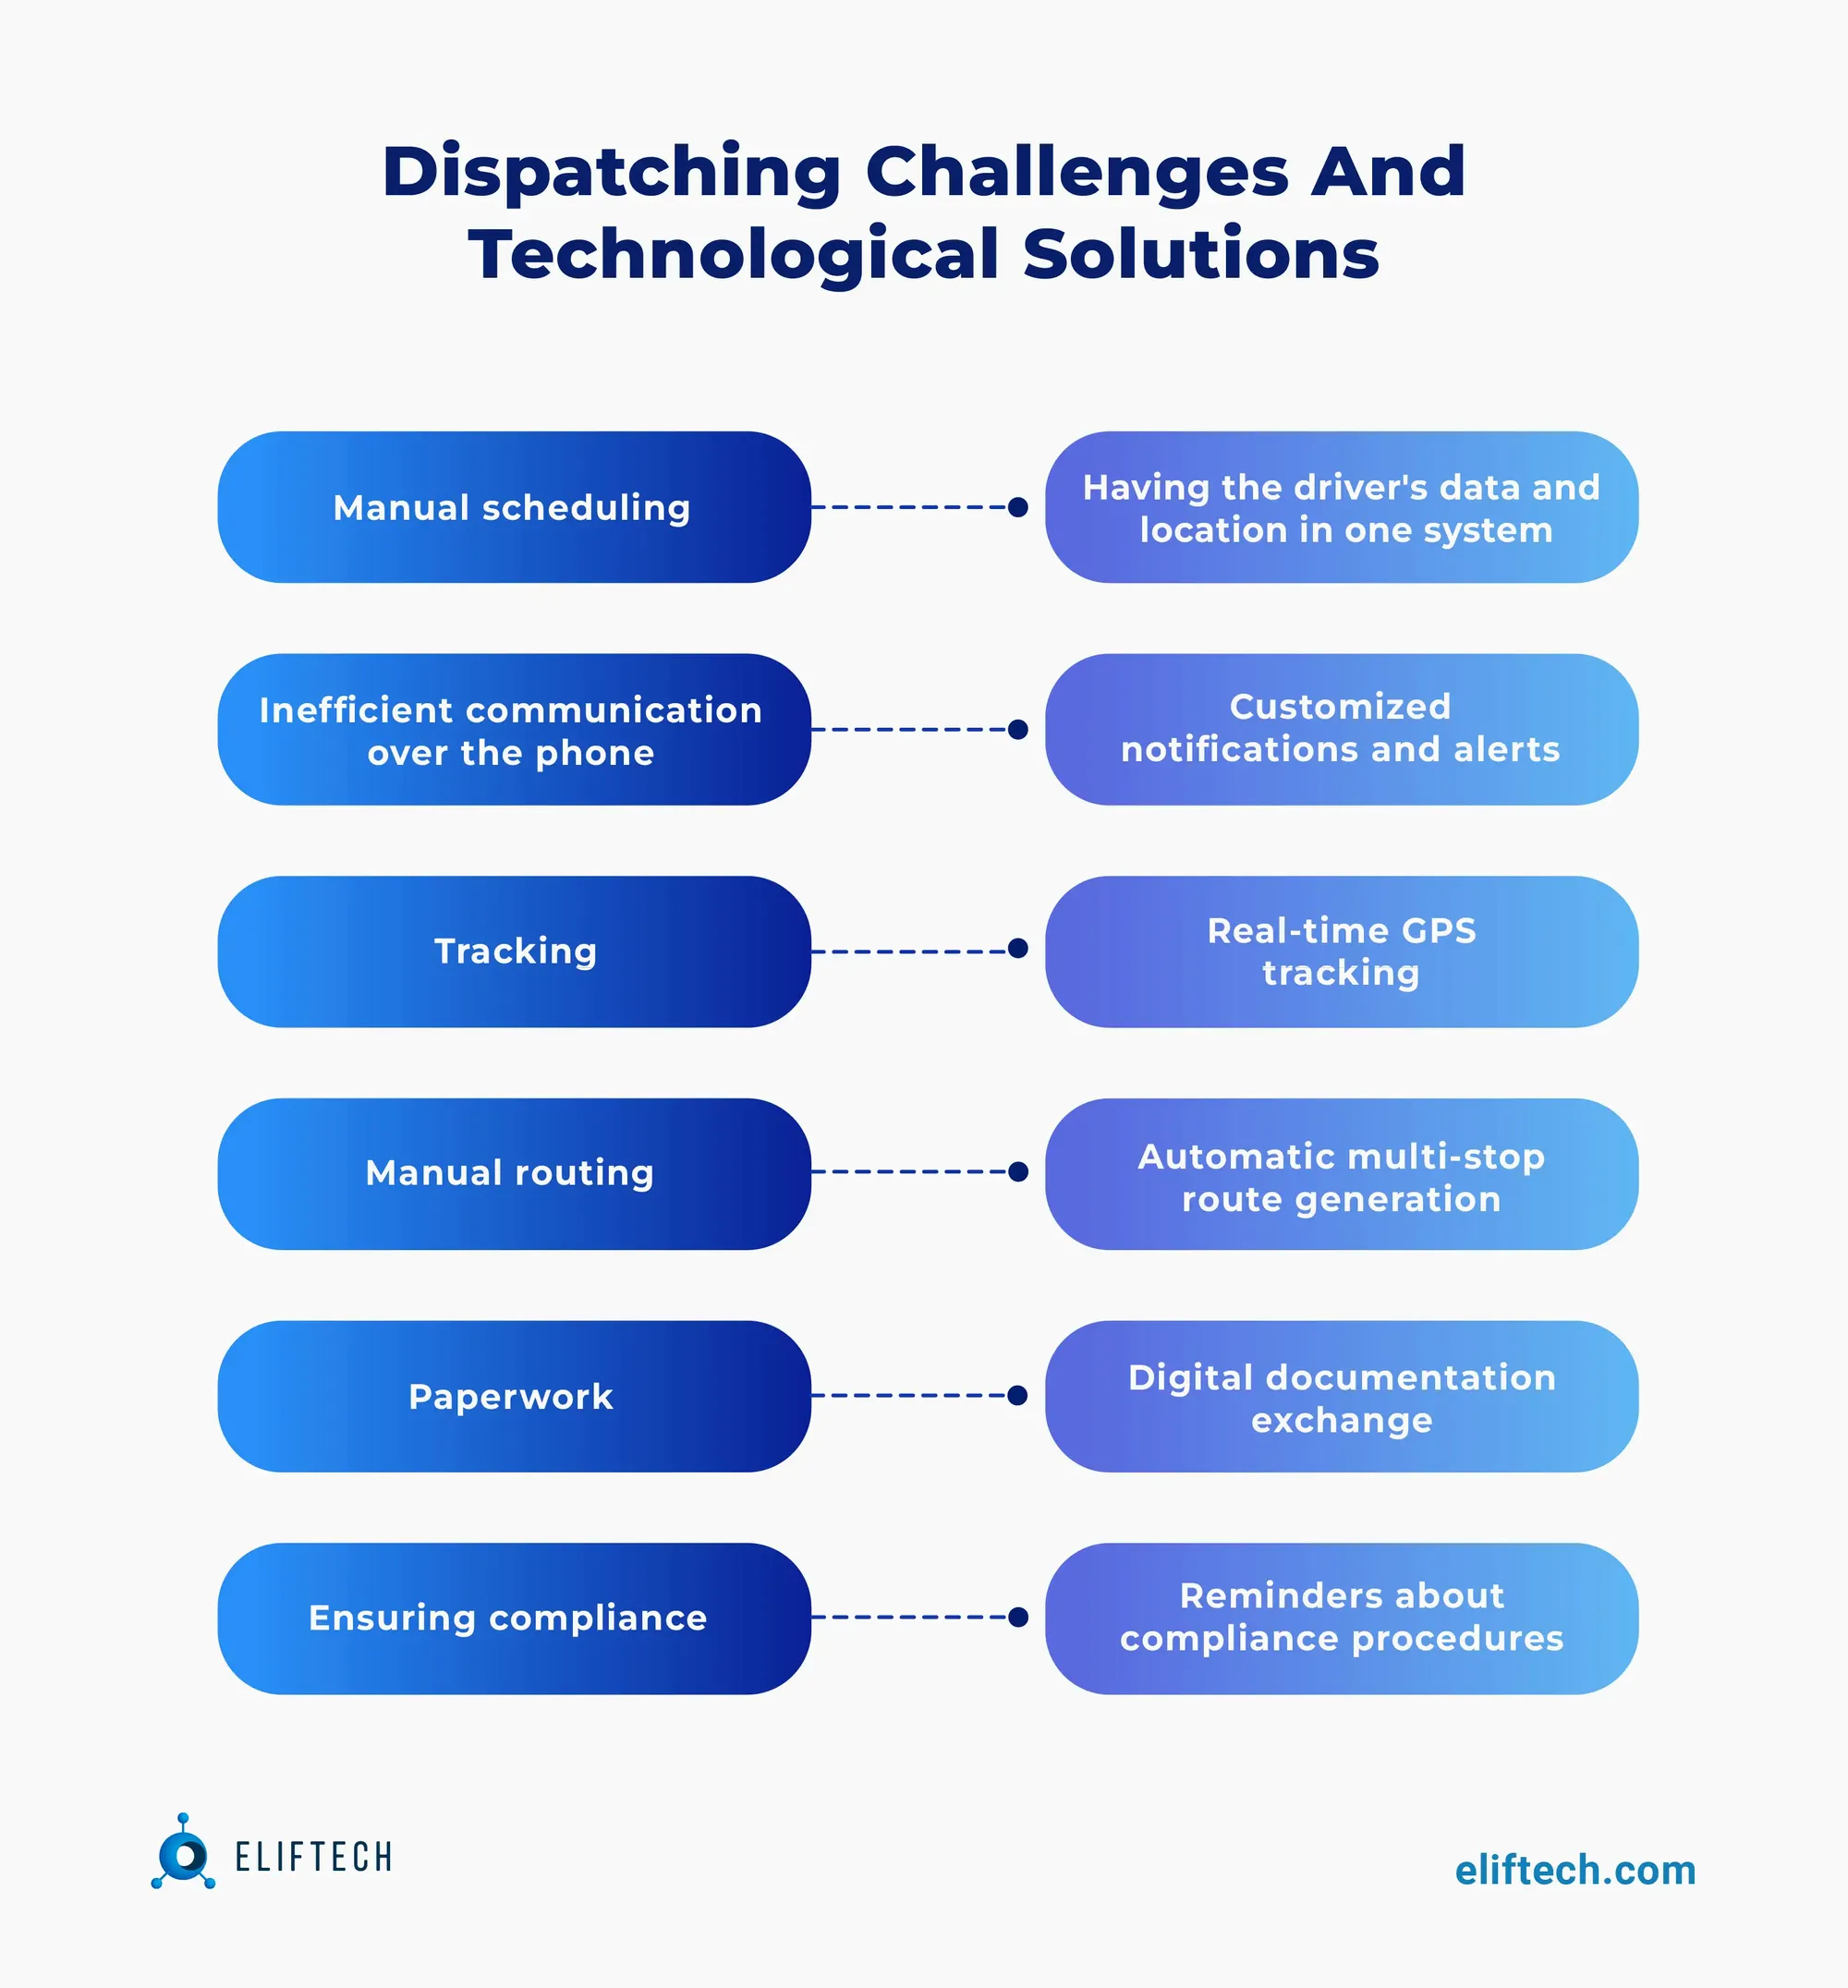 Dispatching Challenges and Technological Solutions